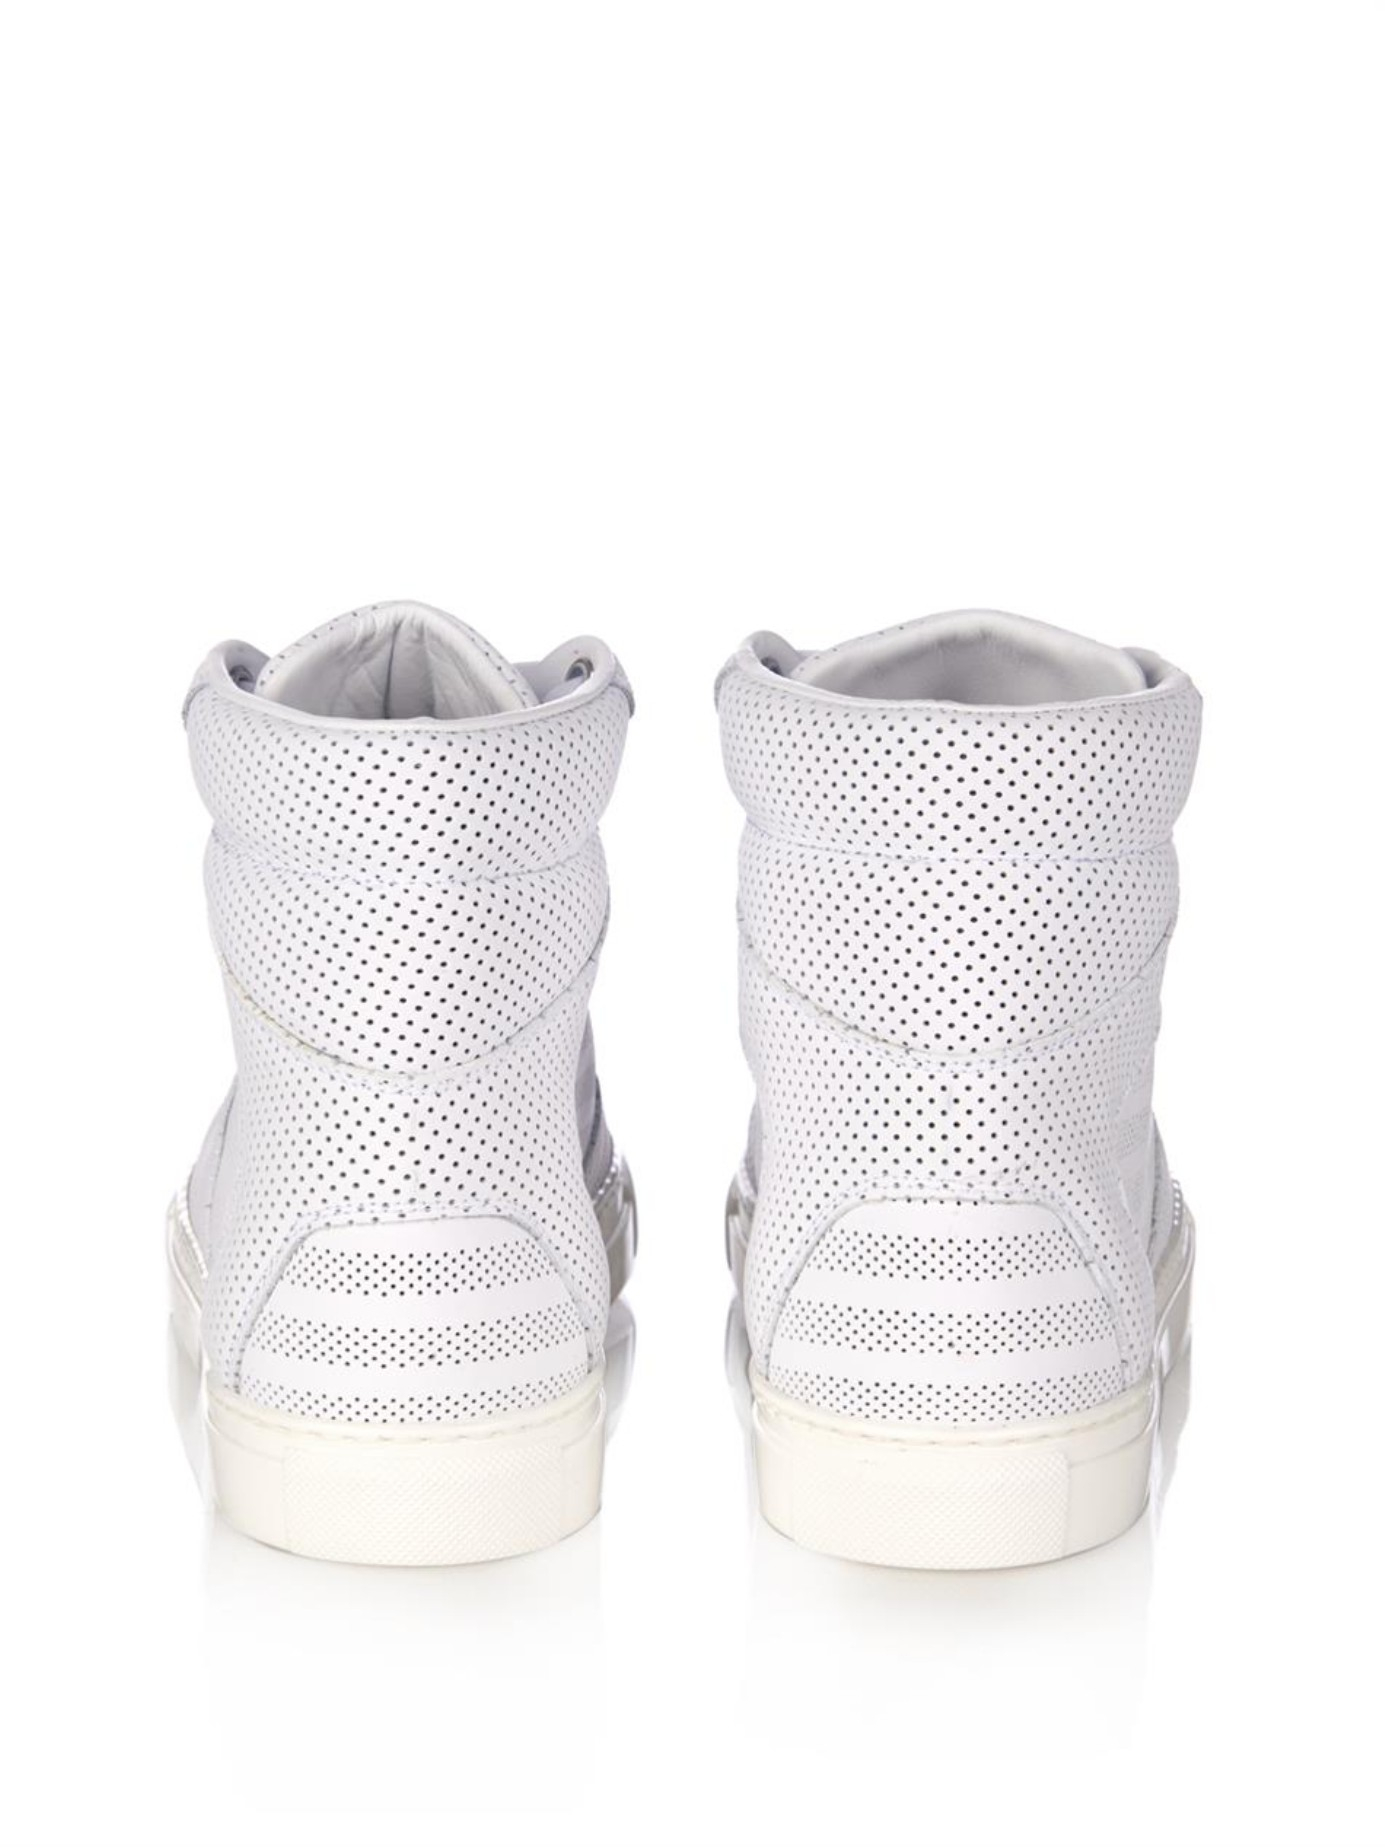 Balenciaga Leather Monochrome Perforated High-Top Trainers in White | Lyst